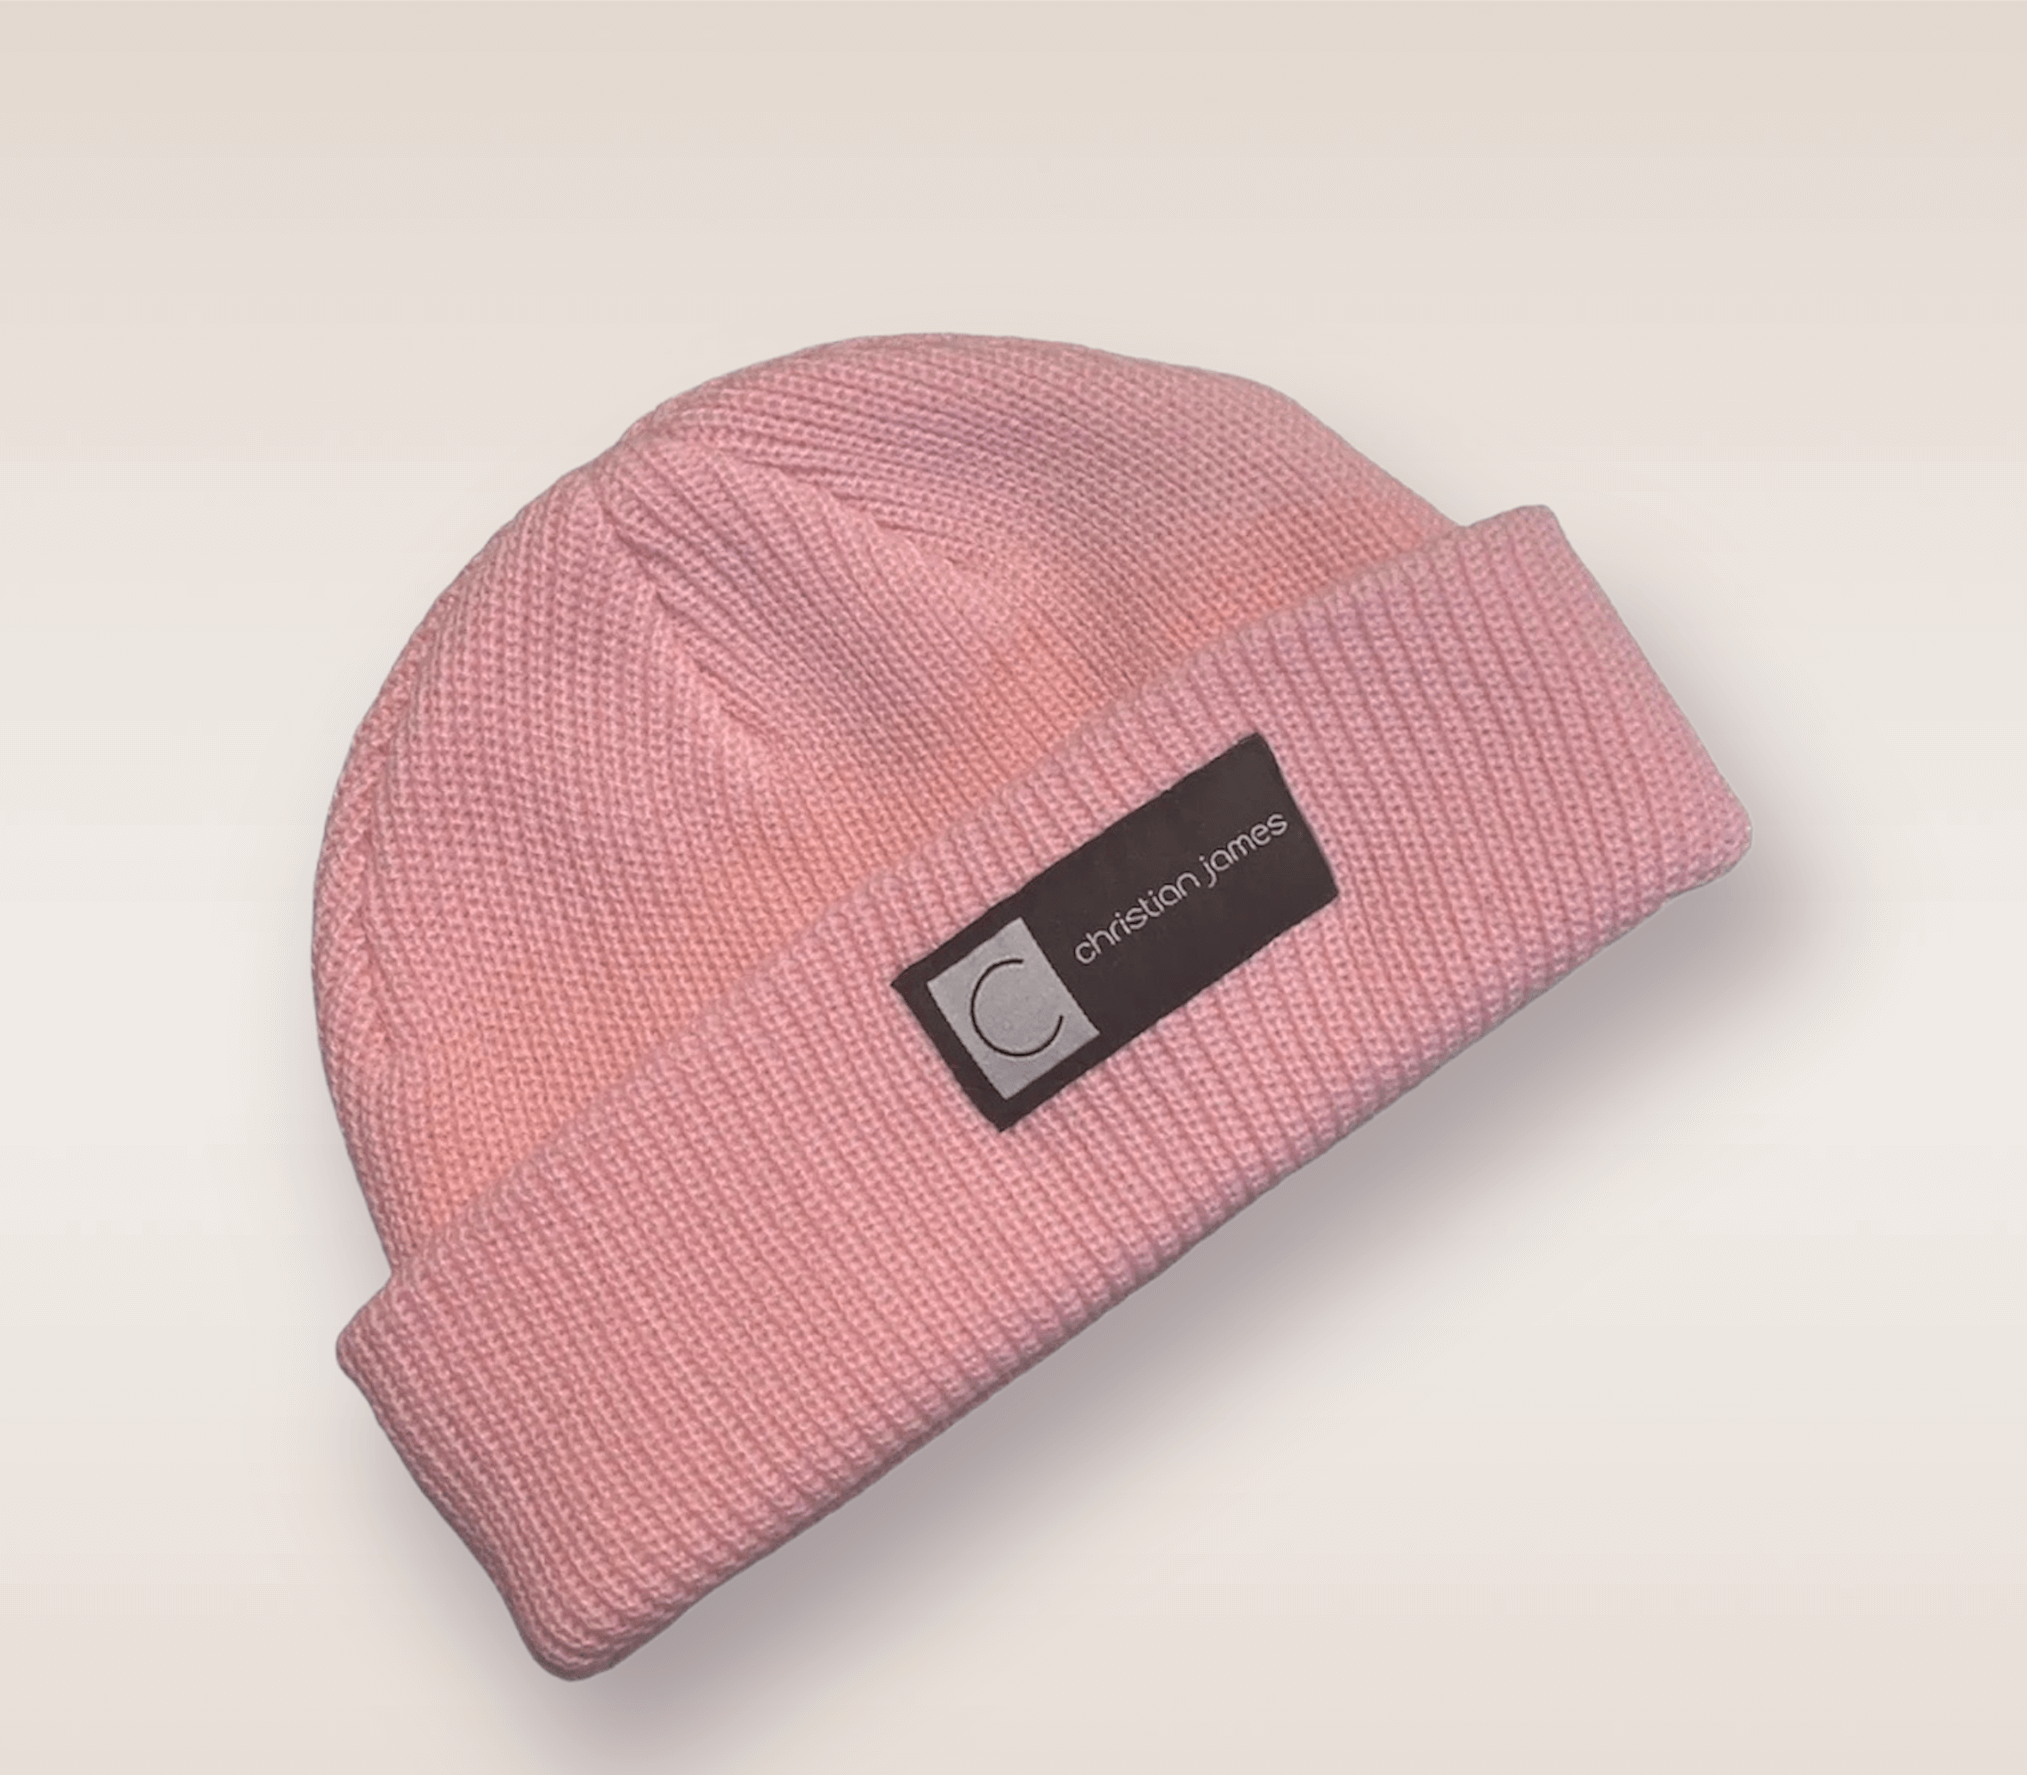 In this up-close shot, we are introduced to the Pink CJ beanie. A pink knit hat featuring an embroidered patch of the brand's acronym in black and white. 